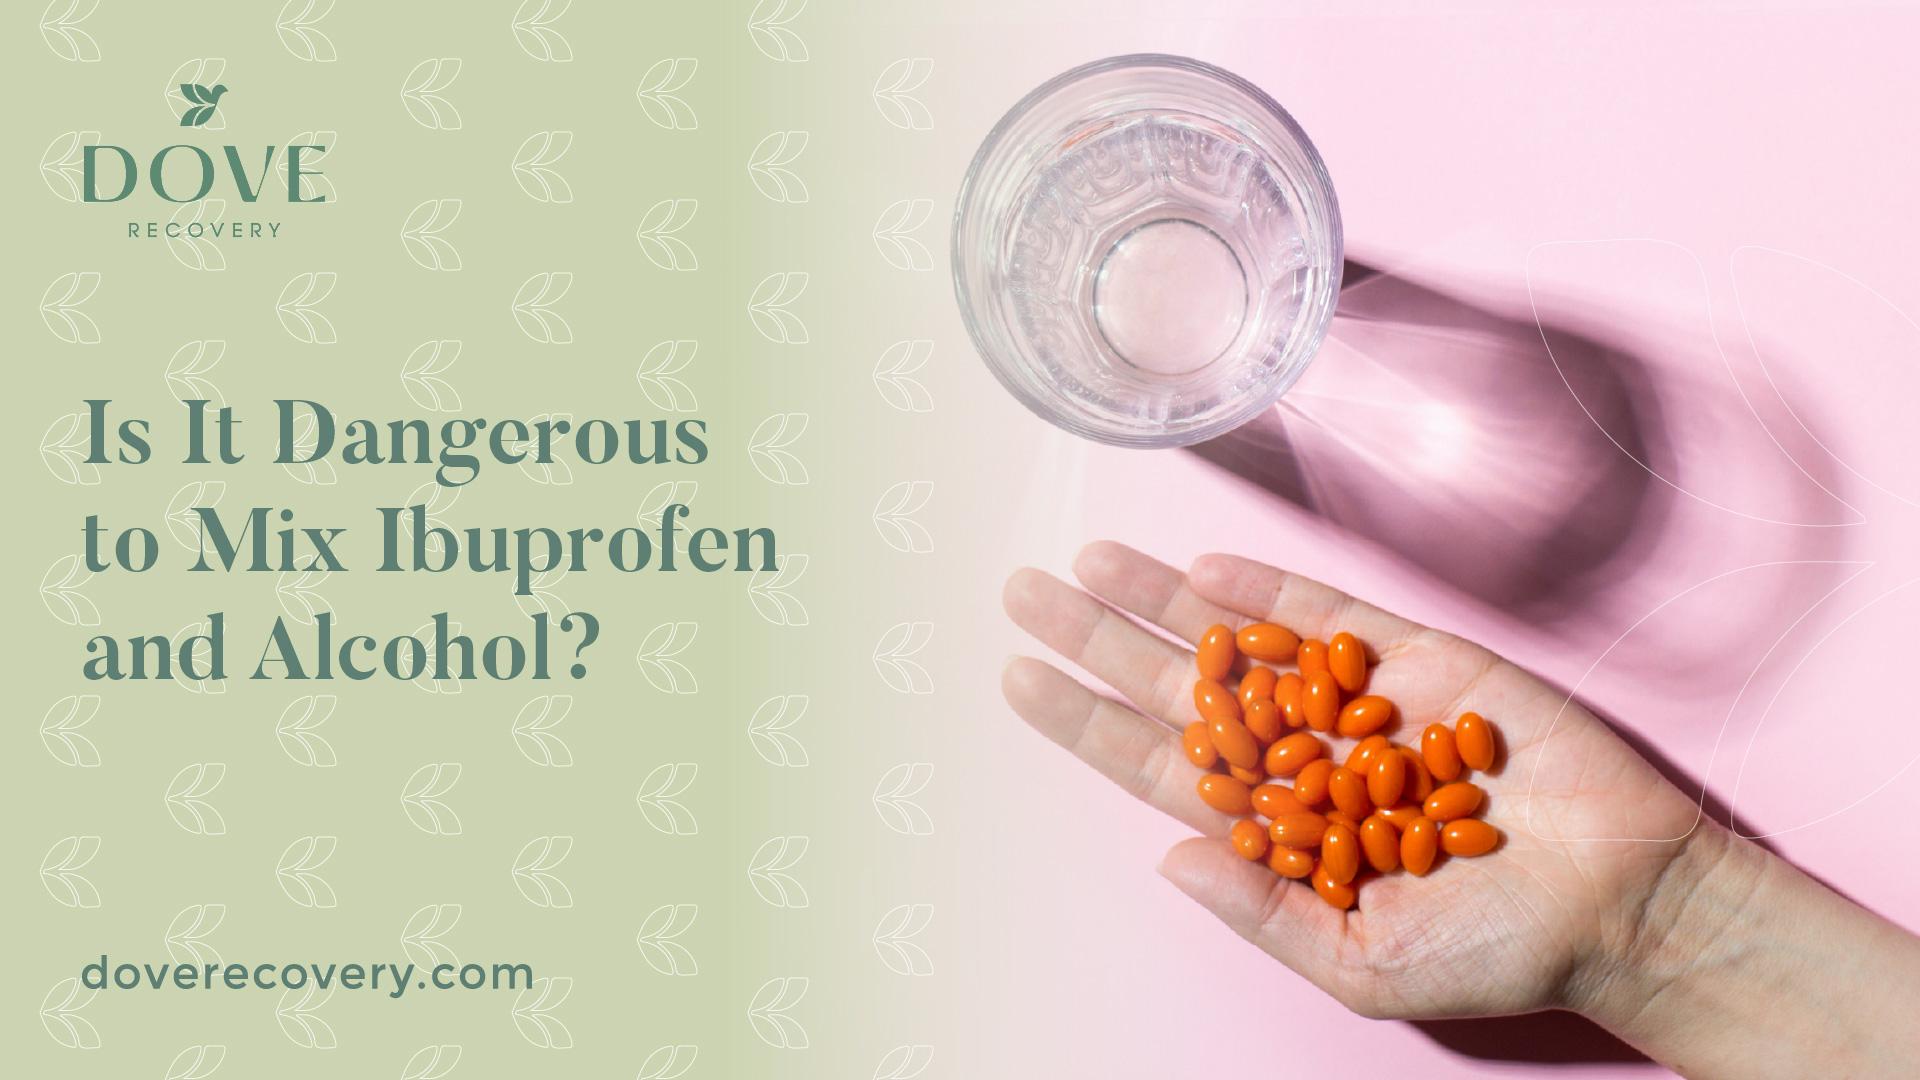 A hand holding a handful of orange ibuprofen pills next to a clear glass with water on a pink background with a green geometric pattern.